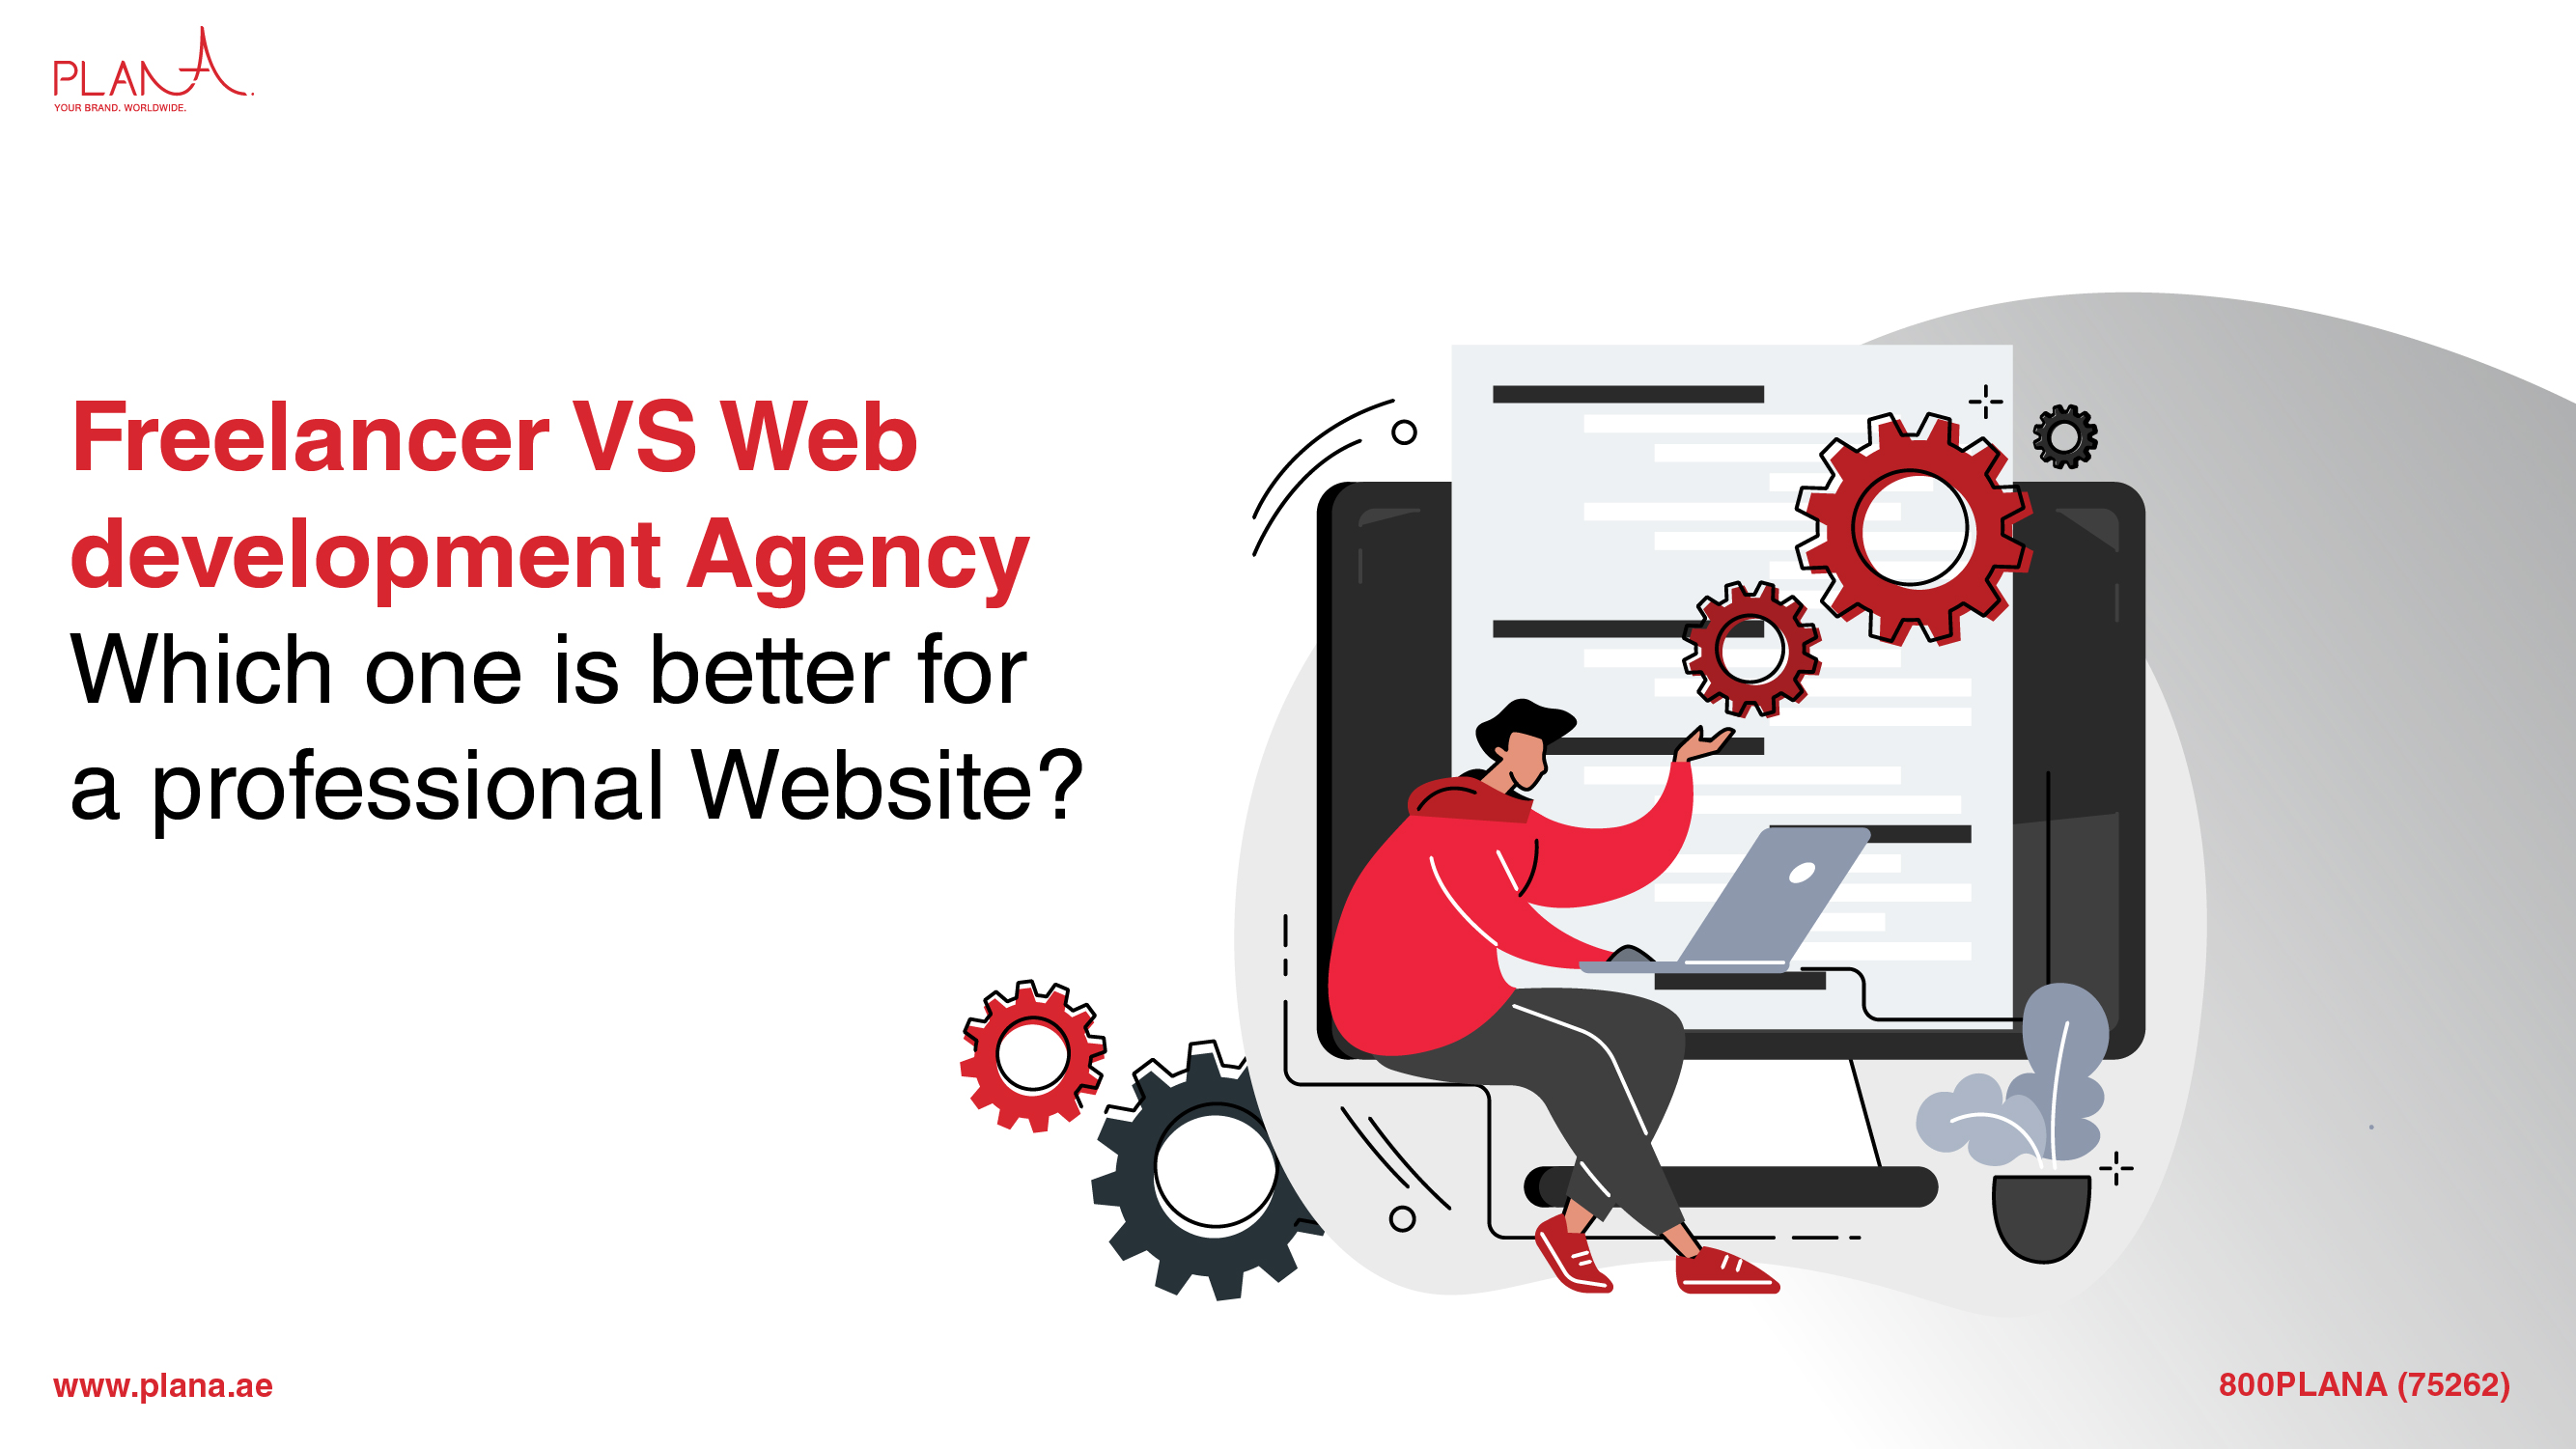 Freelancer VS Web Development Agency—Which One Is Better for A Professional Website?